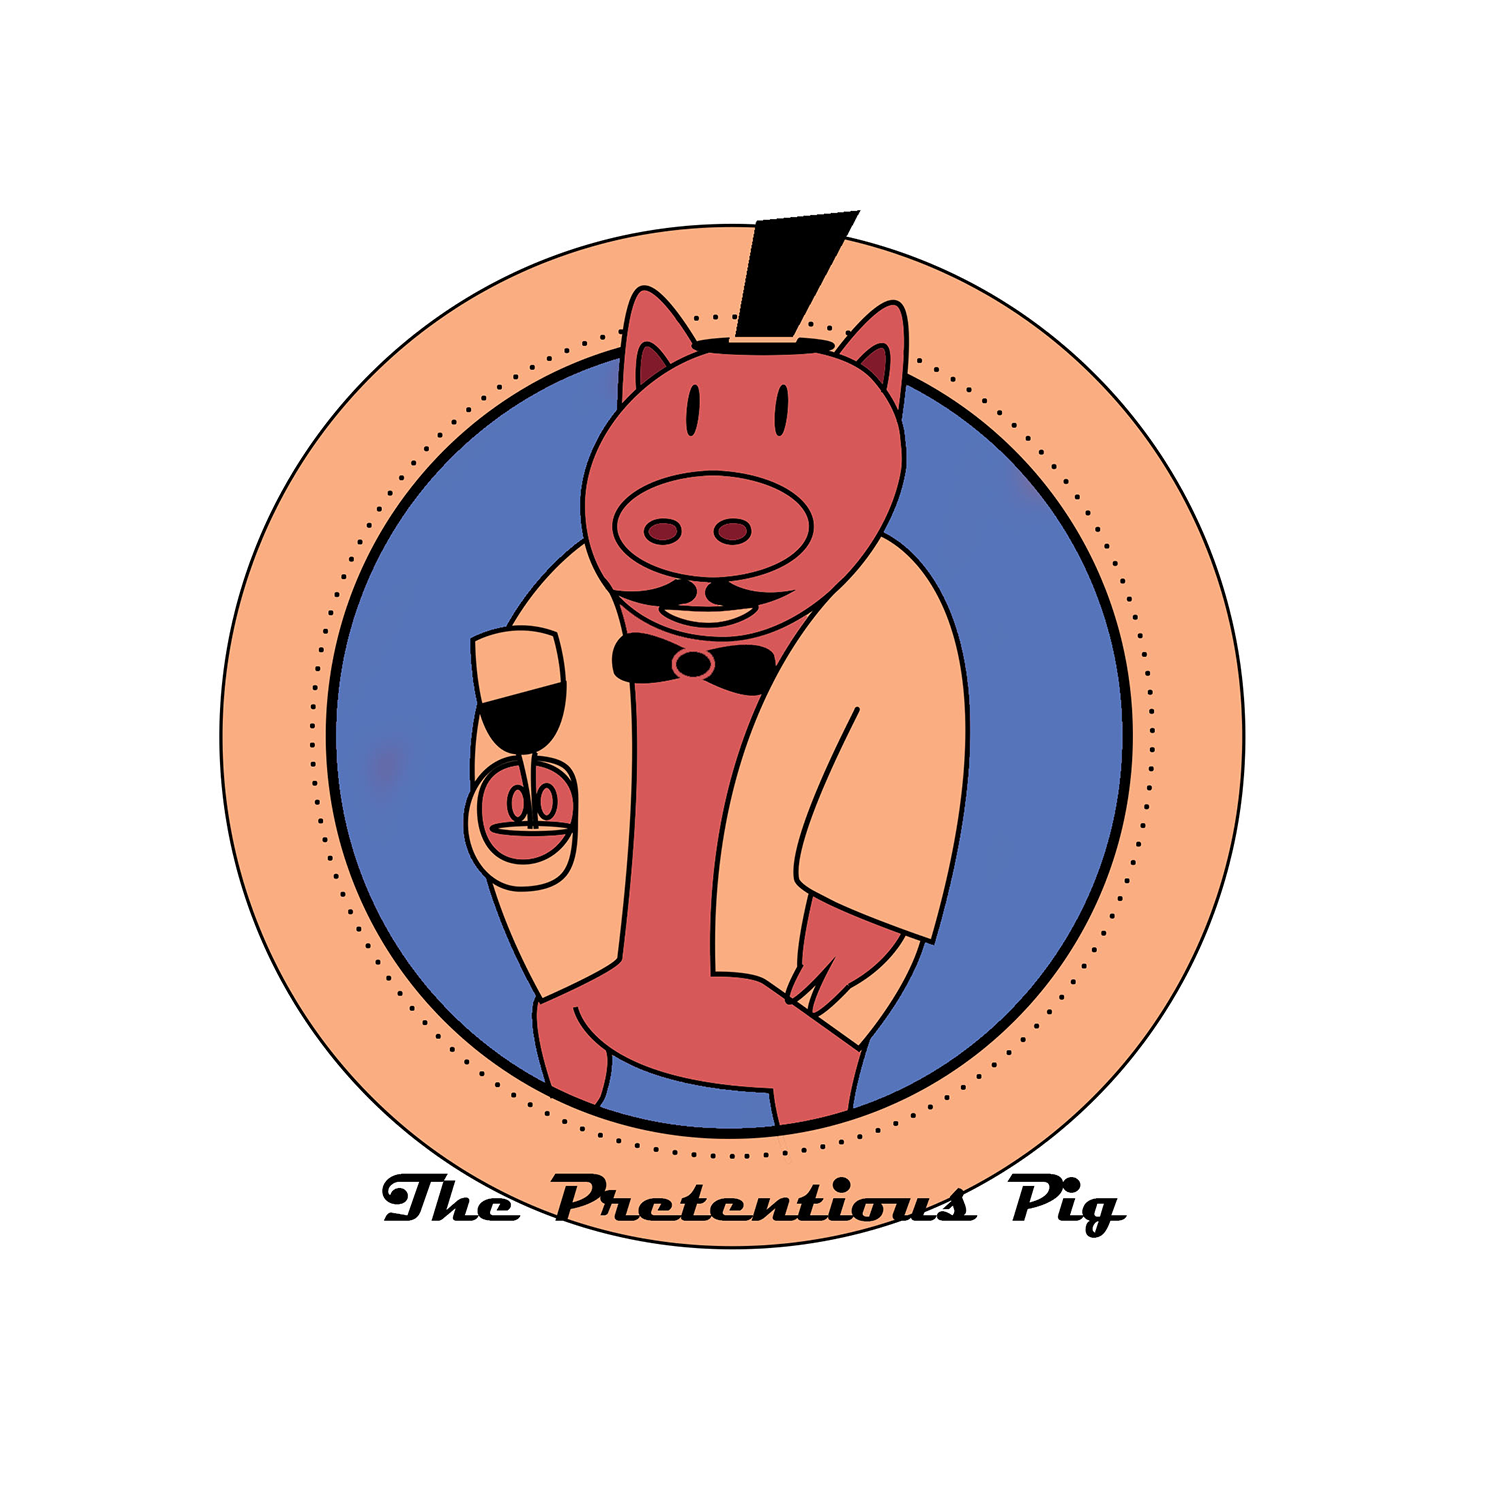 Personable, Playful Logo Design for The Pretentious Pig Gastropub ...